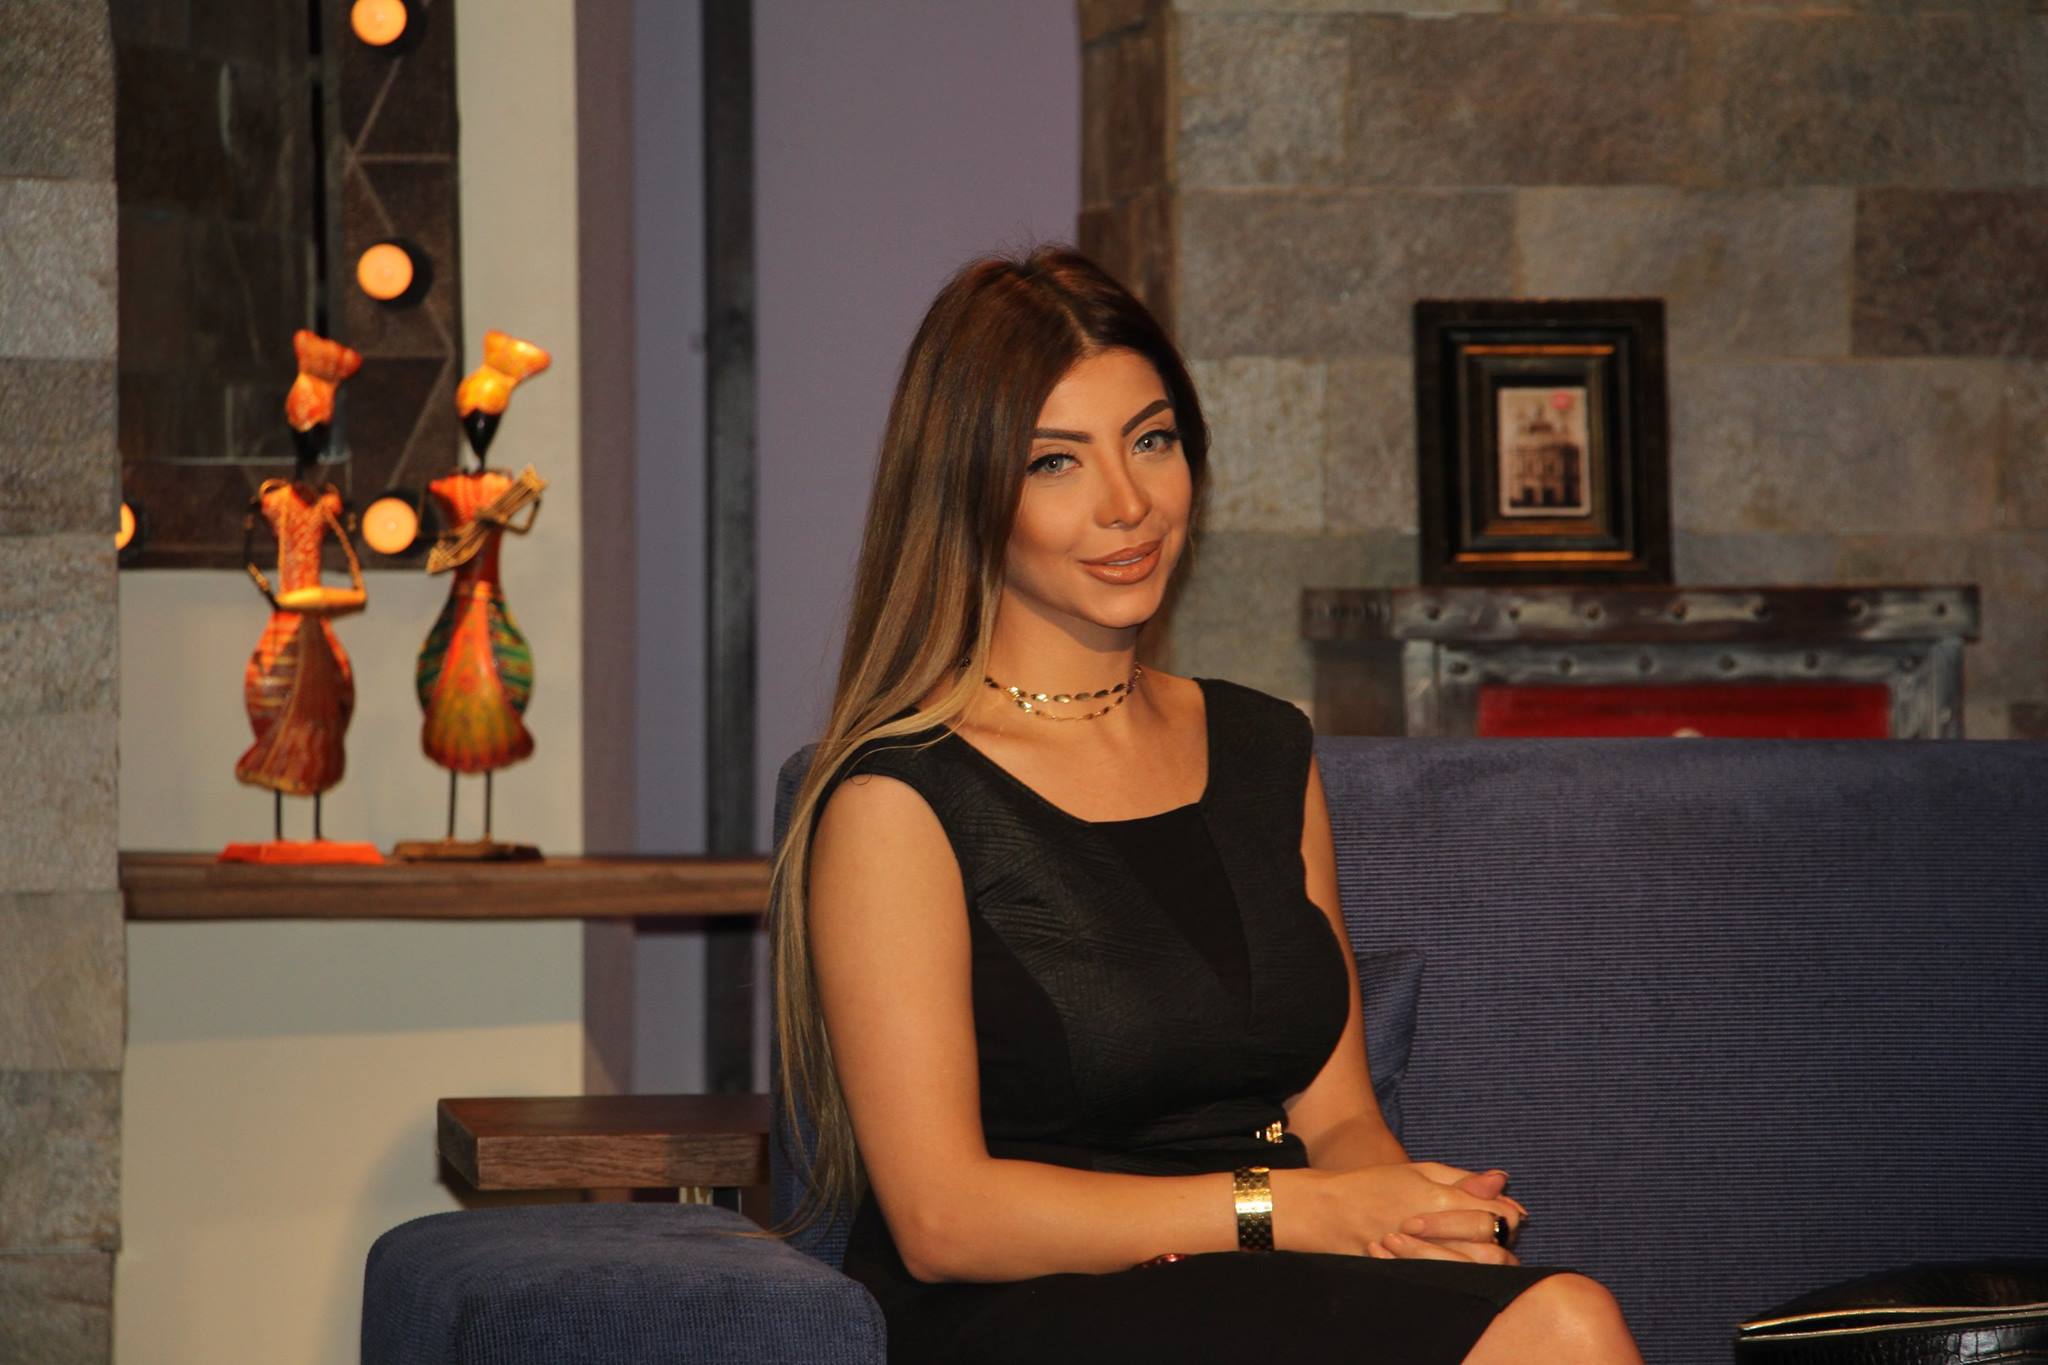 Egyptian Tv Presenter Sentenced To 3 Years In Prison On Charges Of ‘outraging Public Decency